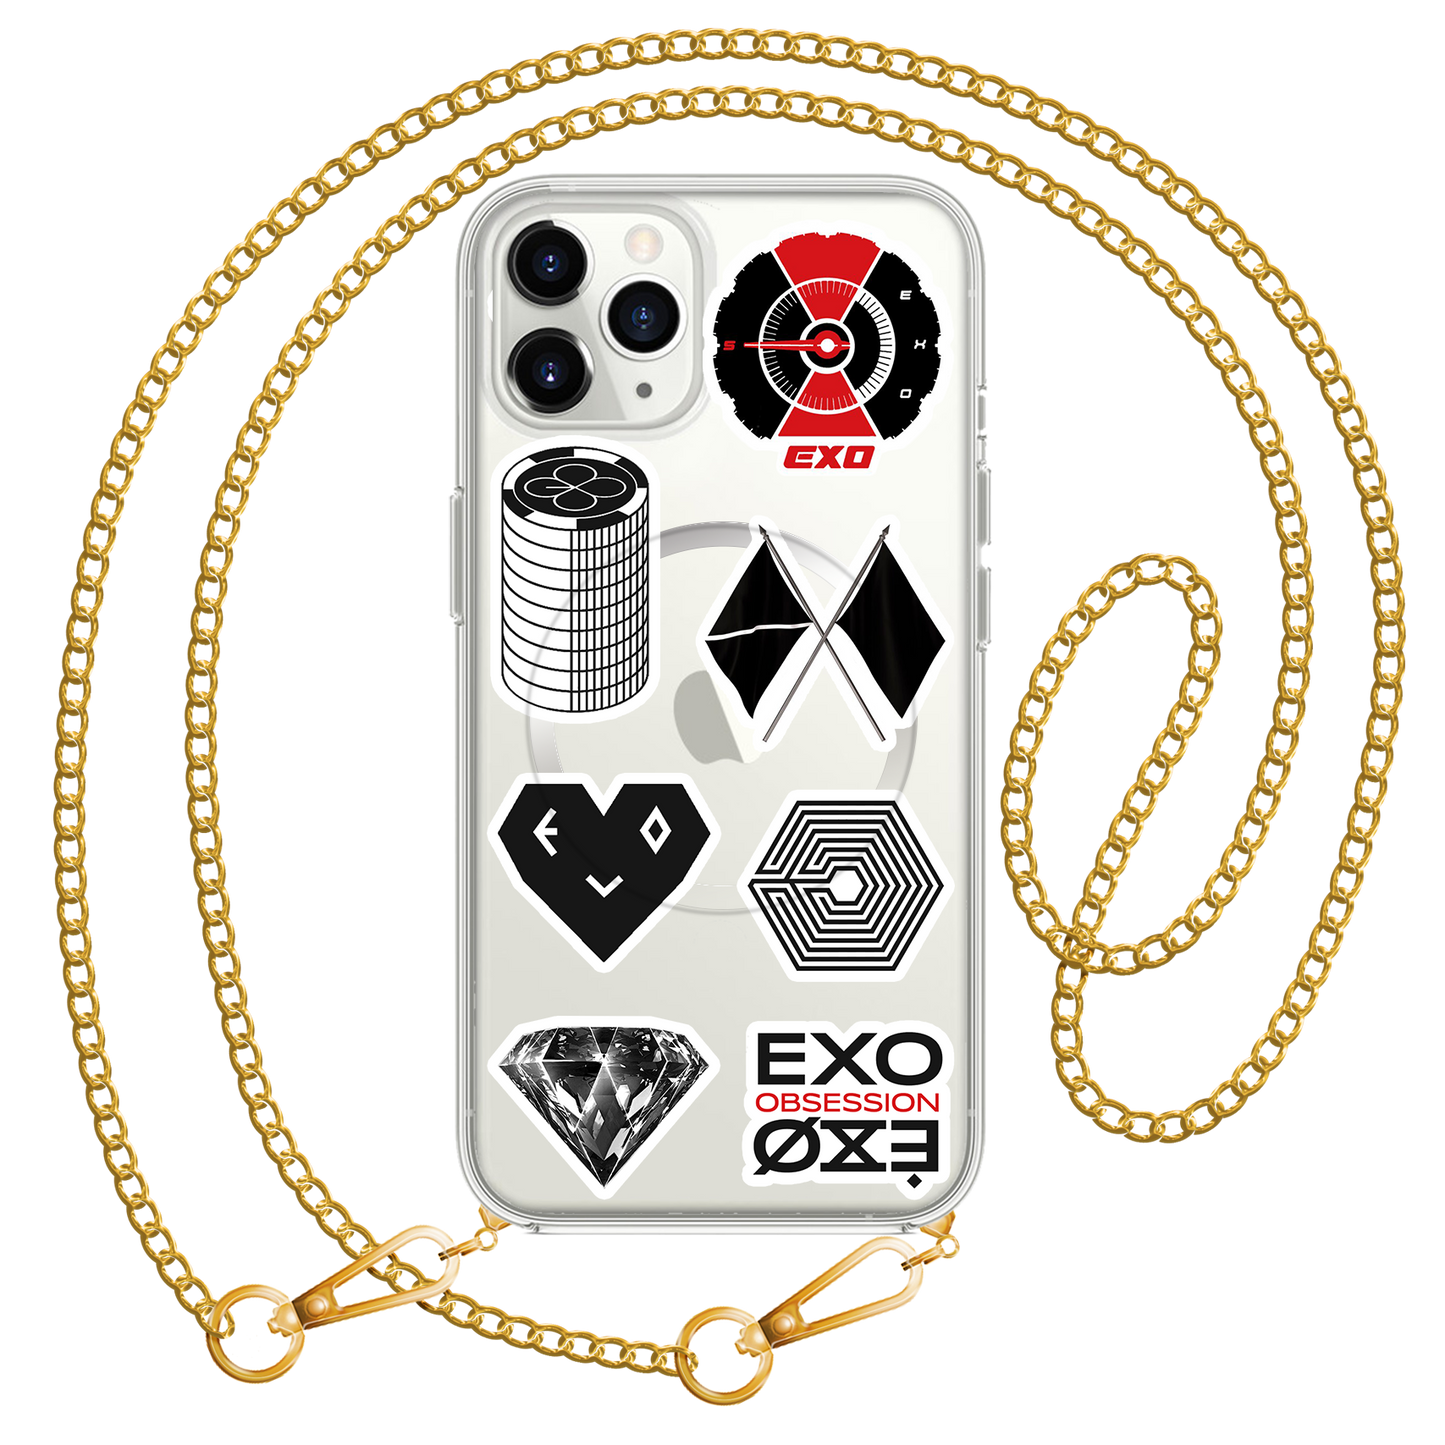 iPhone Rearguard Hybrid - EXO Sticker Pack